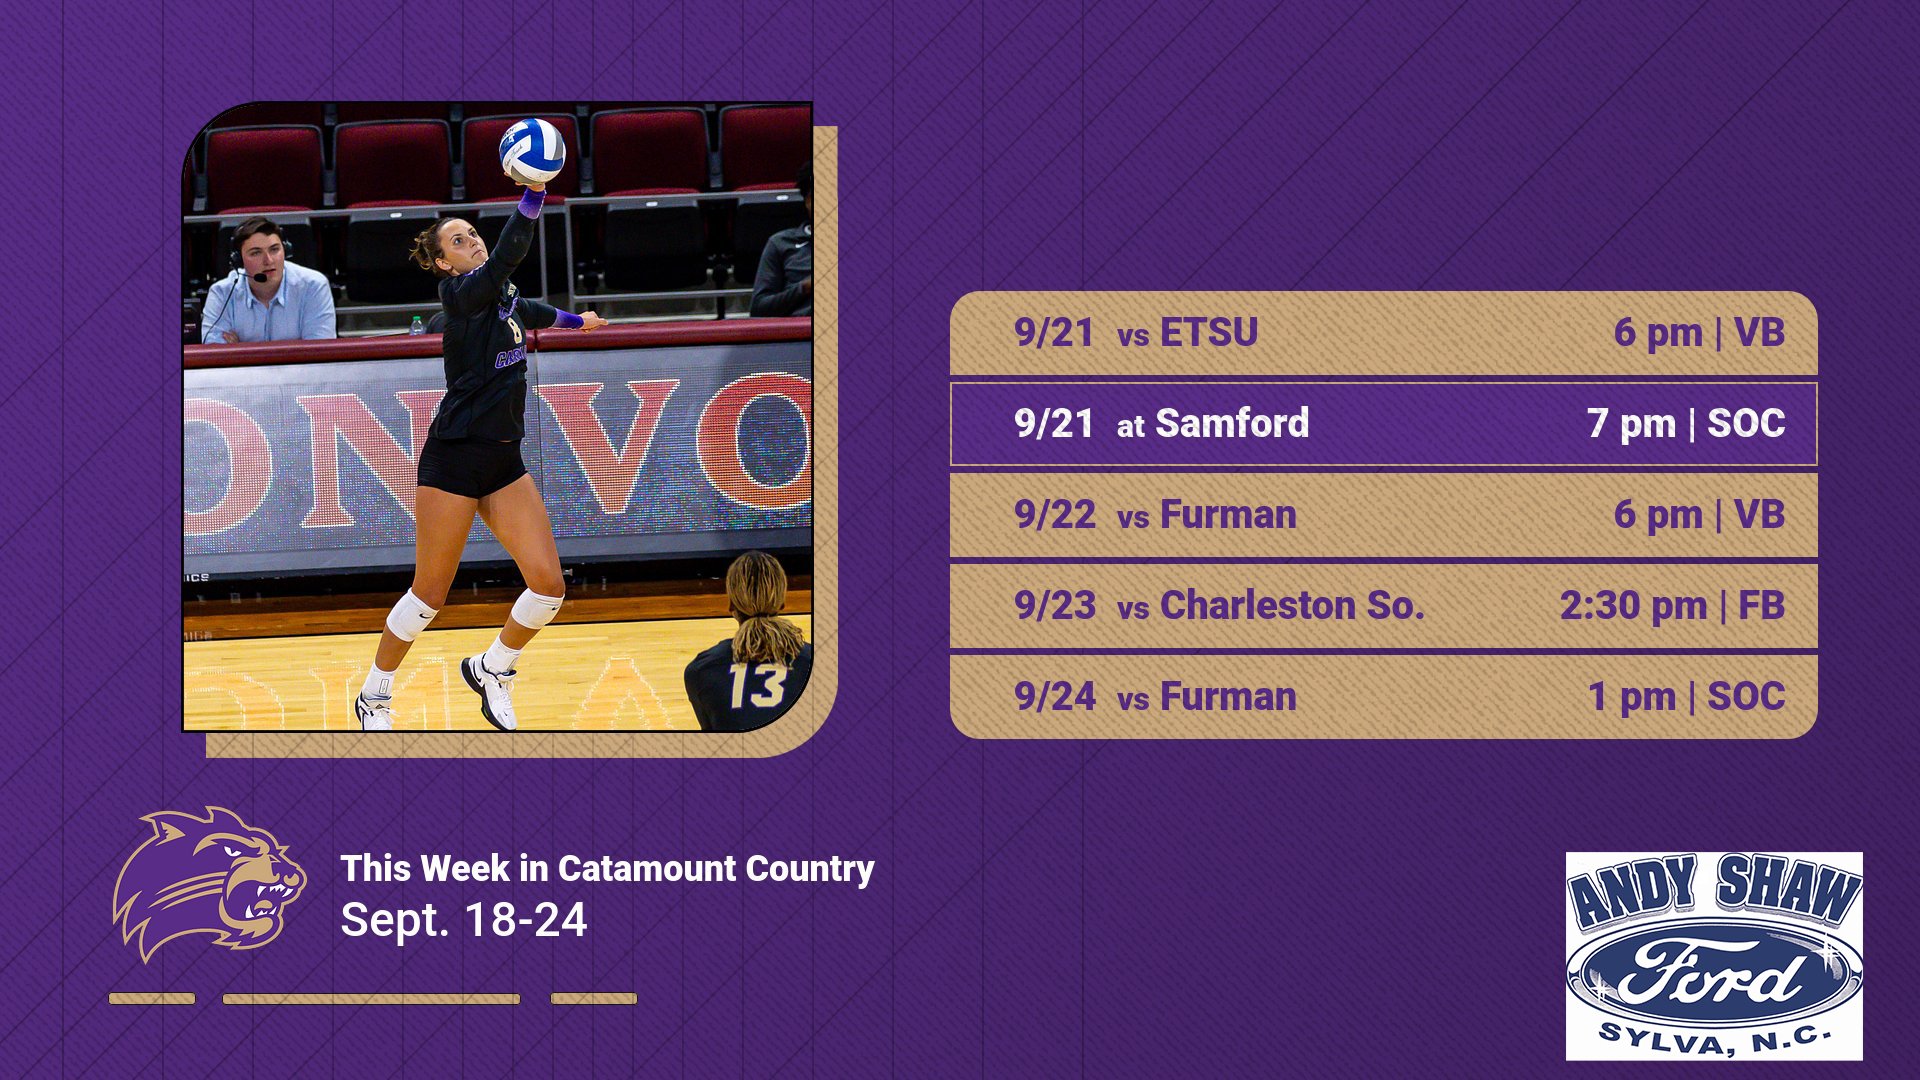 This Week in Catamount Country